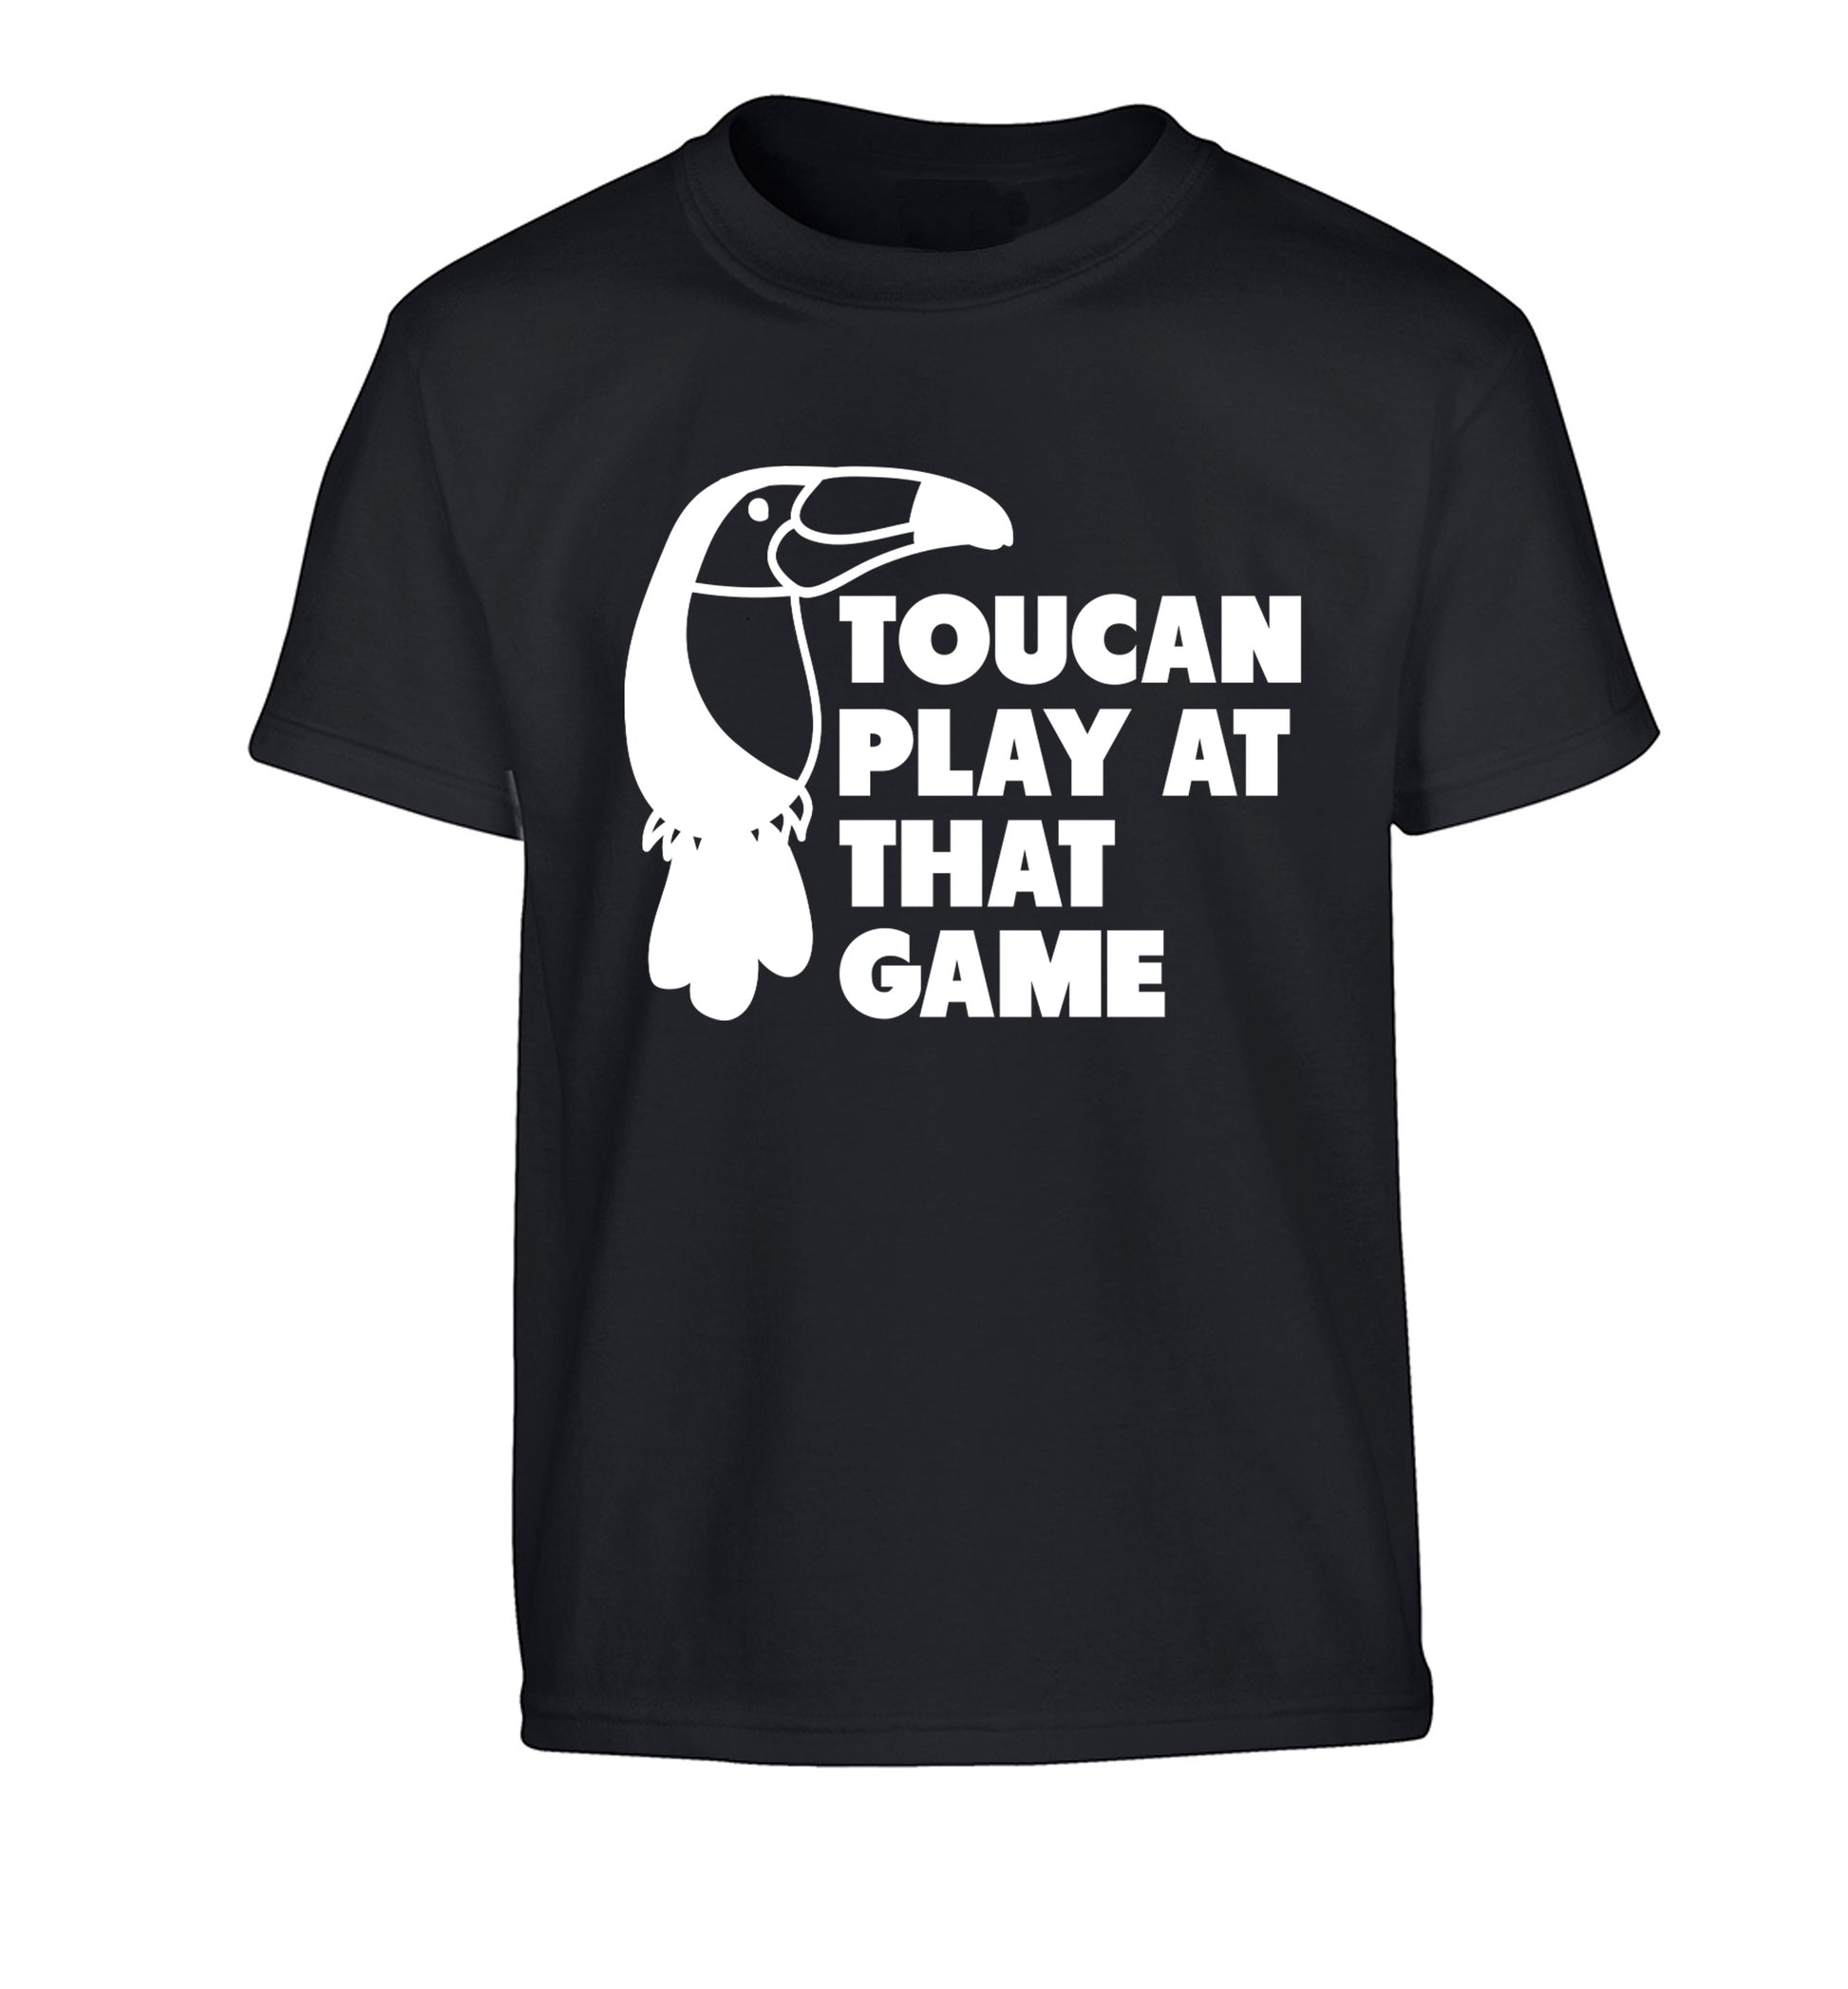 Toucan play at that game Children's black Tshirt 12-13 Years